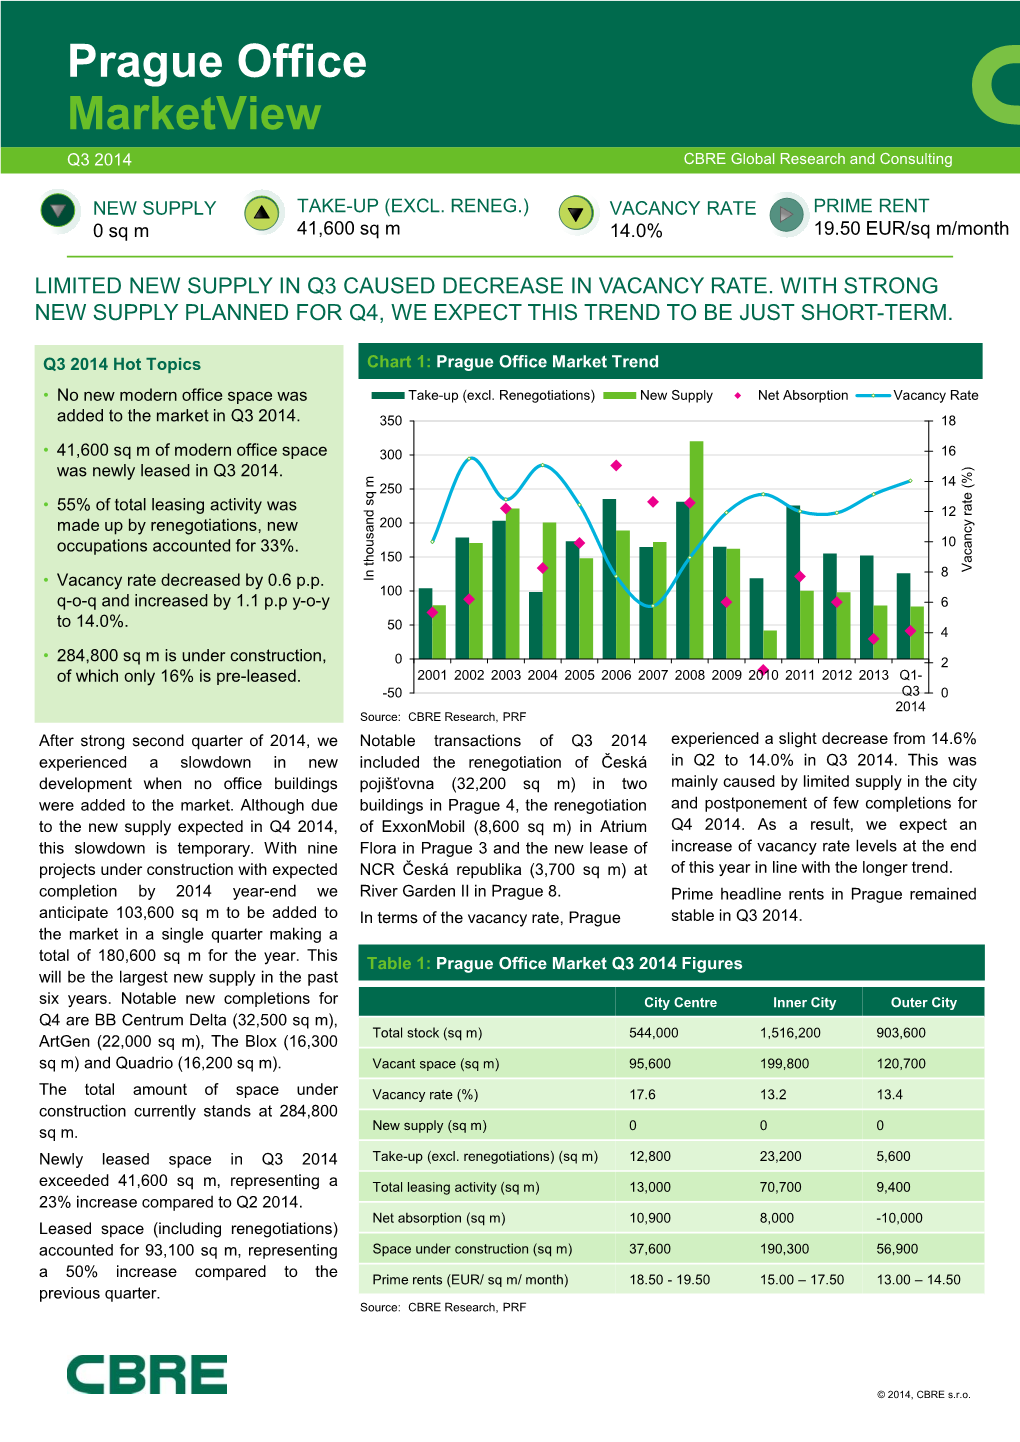 Prague Office Marketview Q3 2014 CBRE Global Research and Consulting